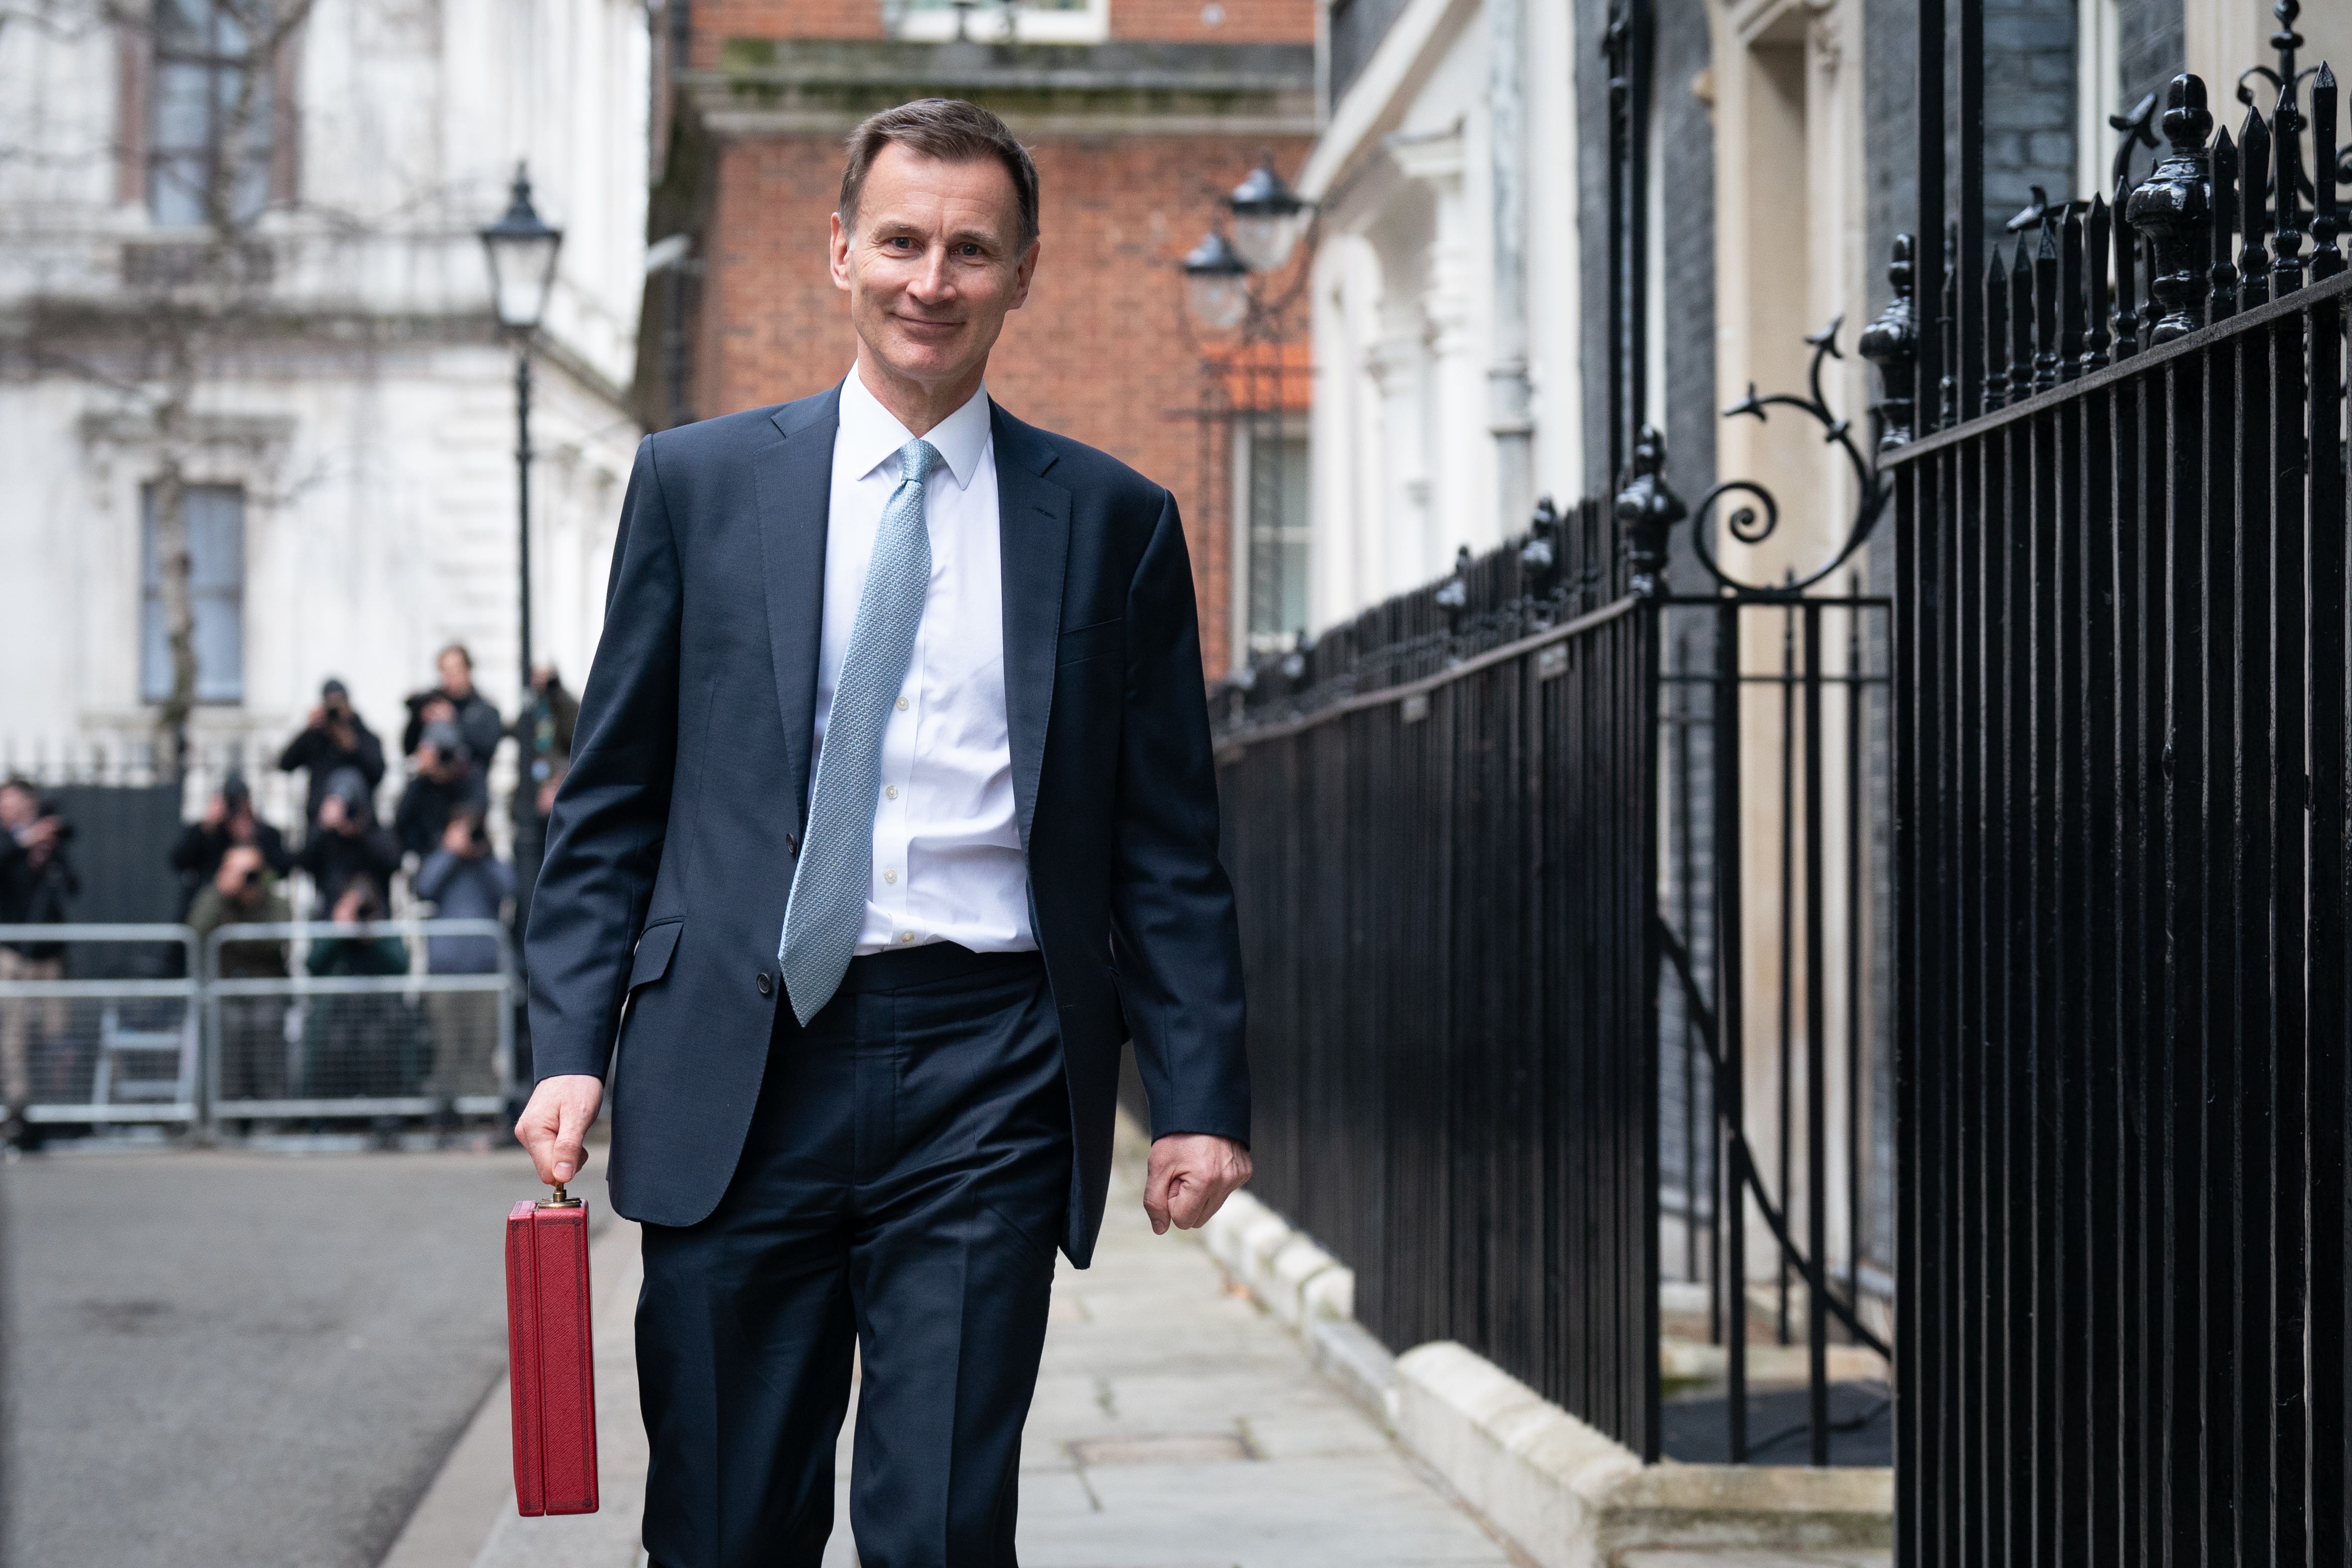 Mr Hunt has more than once admitted that his sums did not add up